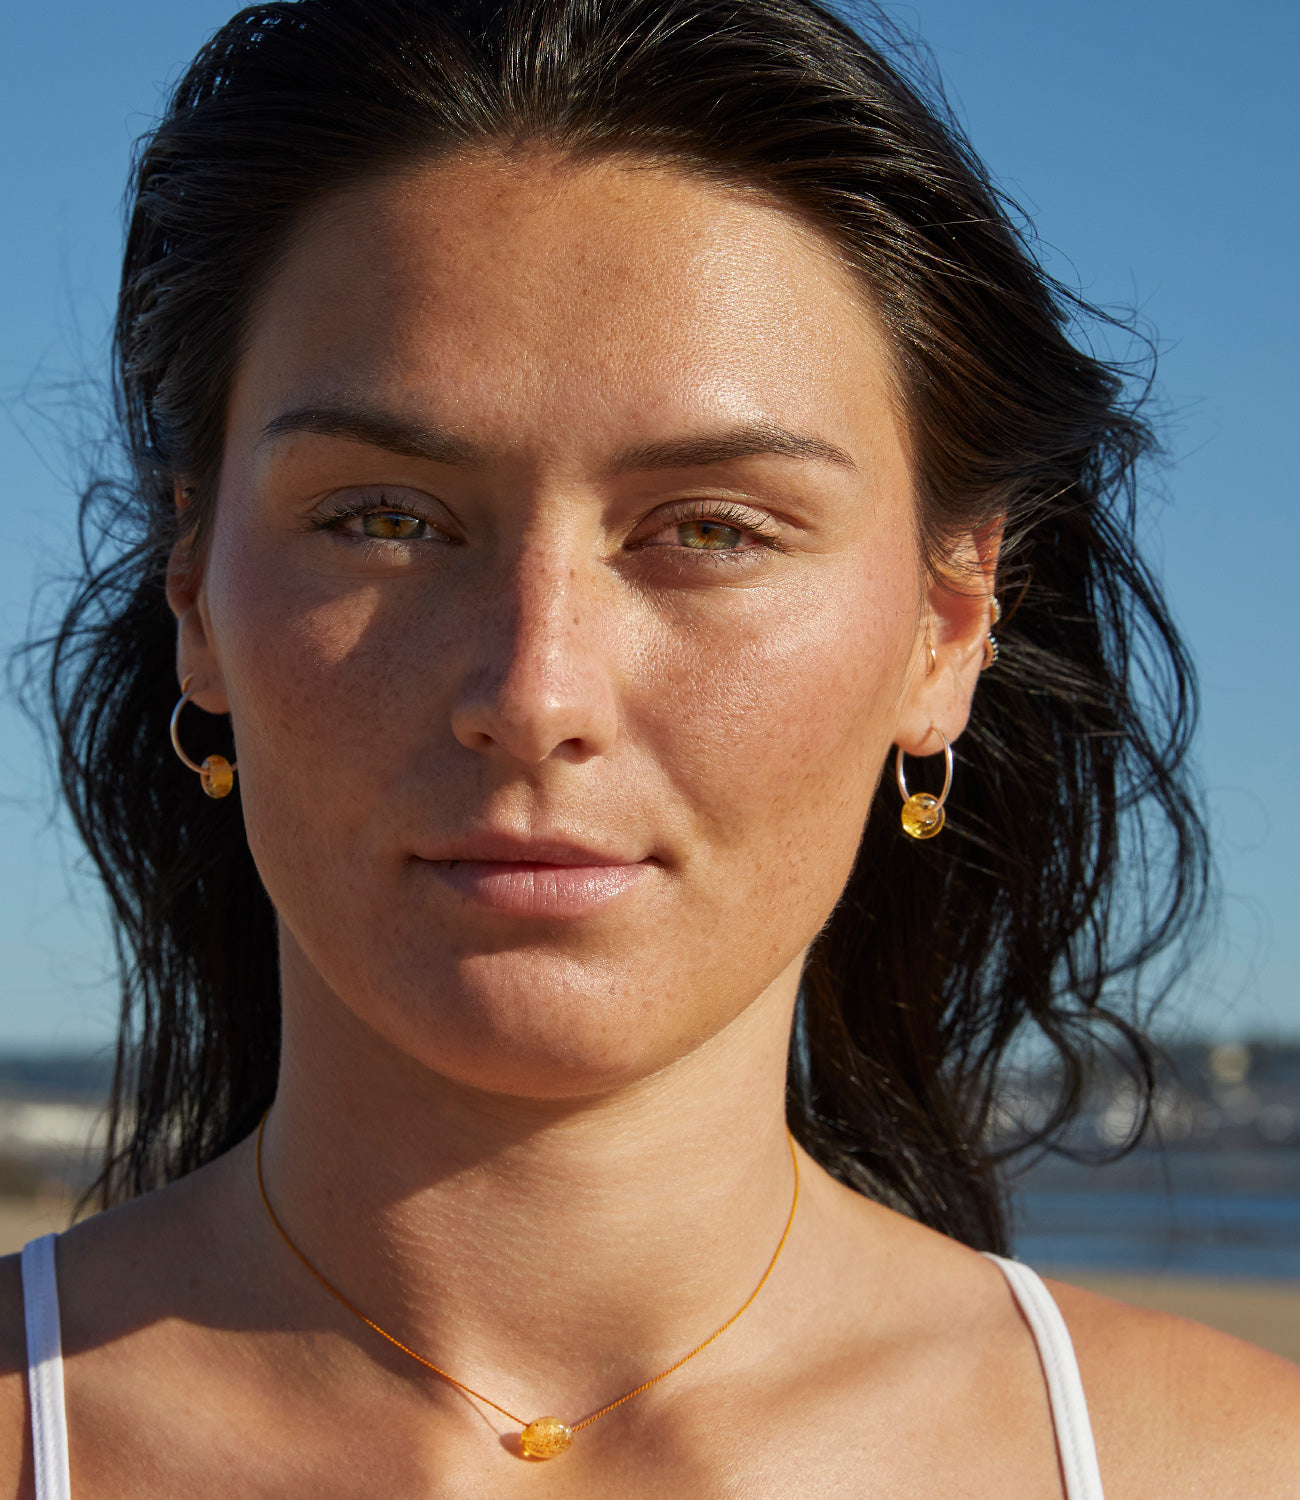 Girl wearing amber glass beads on sterling silver hoop earrings at the beach Crow Point.